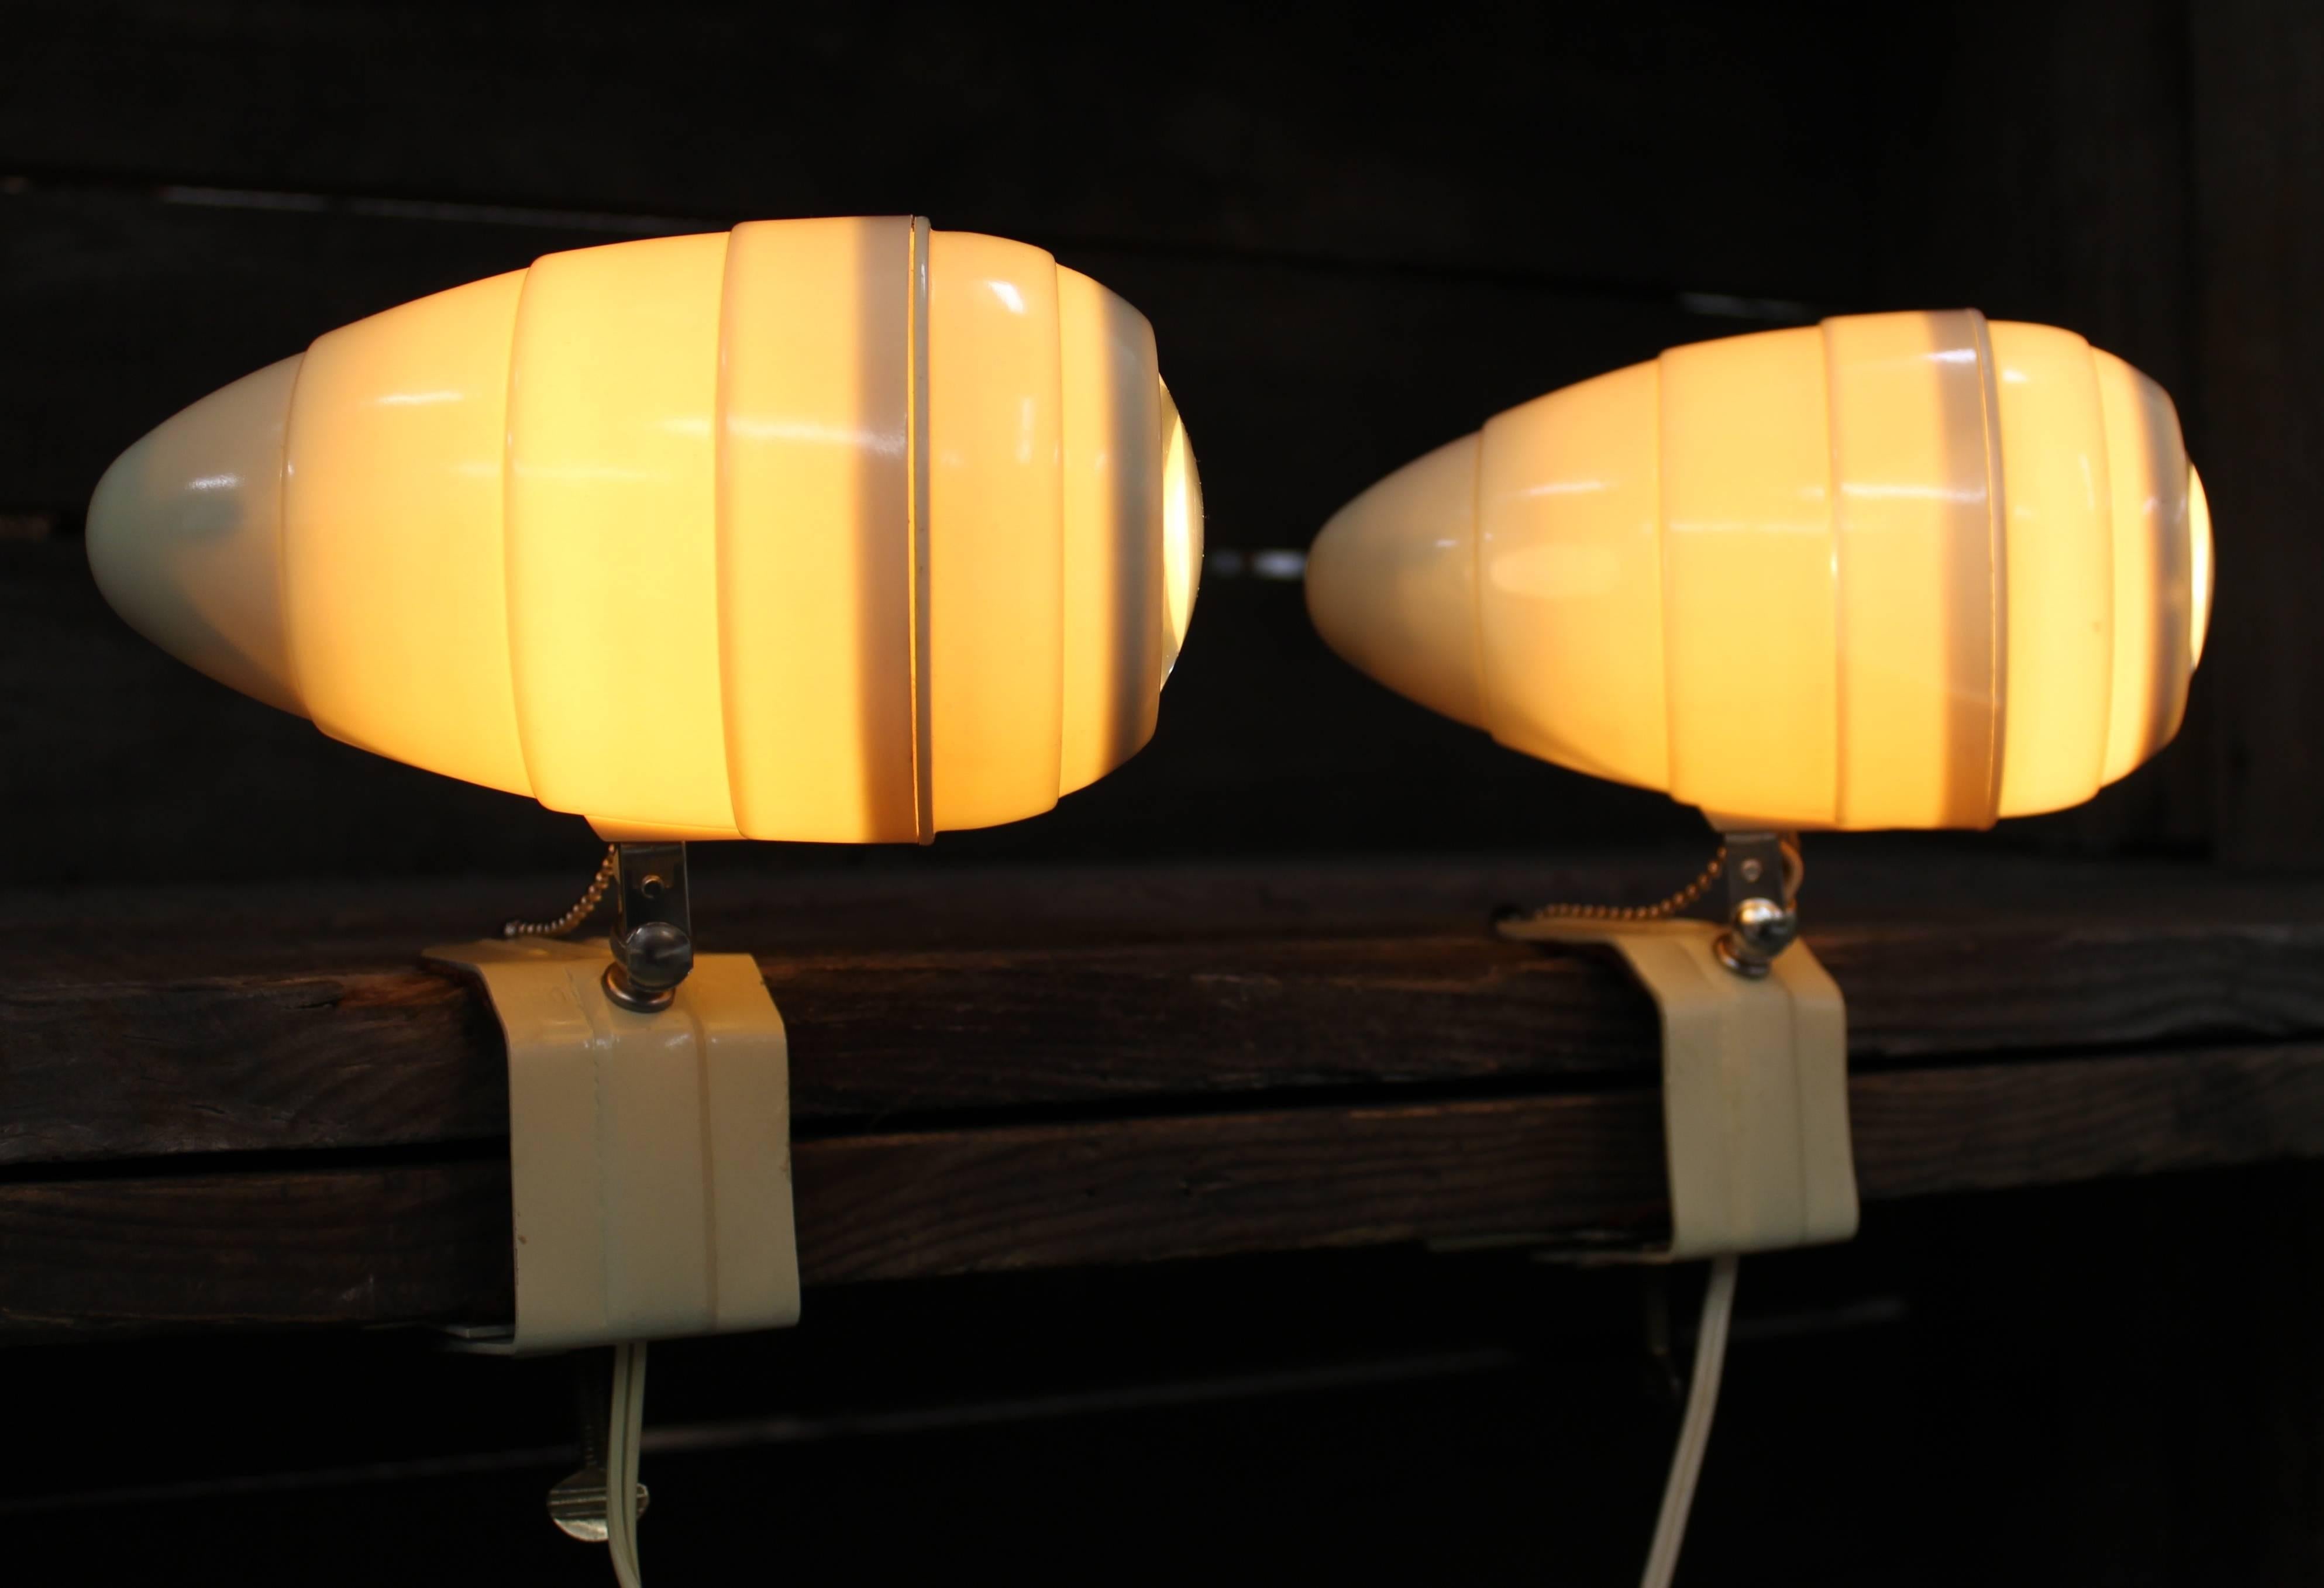 Pair of beehive clamp-on Mid-Century Modern lamps for bed or desk.

Mid-Century Modern clamp-on swivel lamps. Adjustable retro lighting which are great for bed posts, desks, or other places. Beehive and cone shaped with fish eye lenses. They have